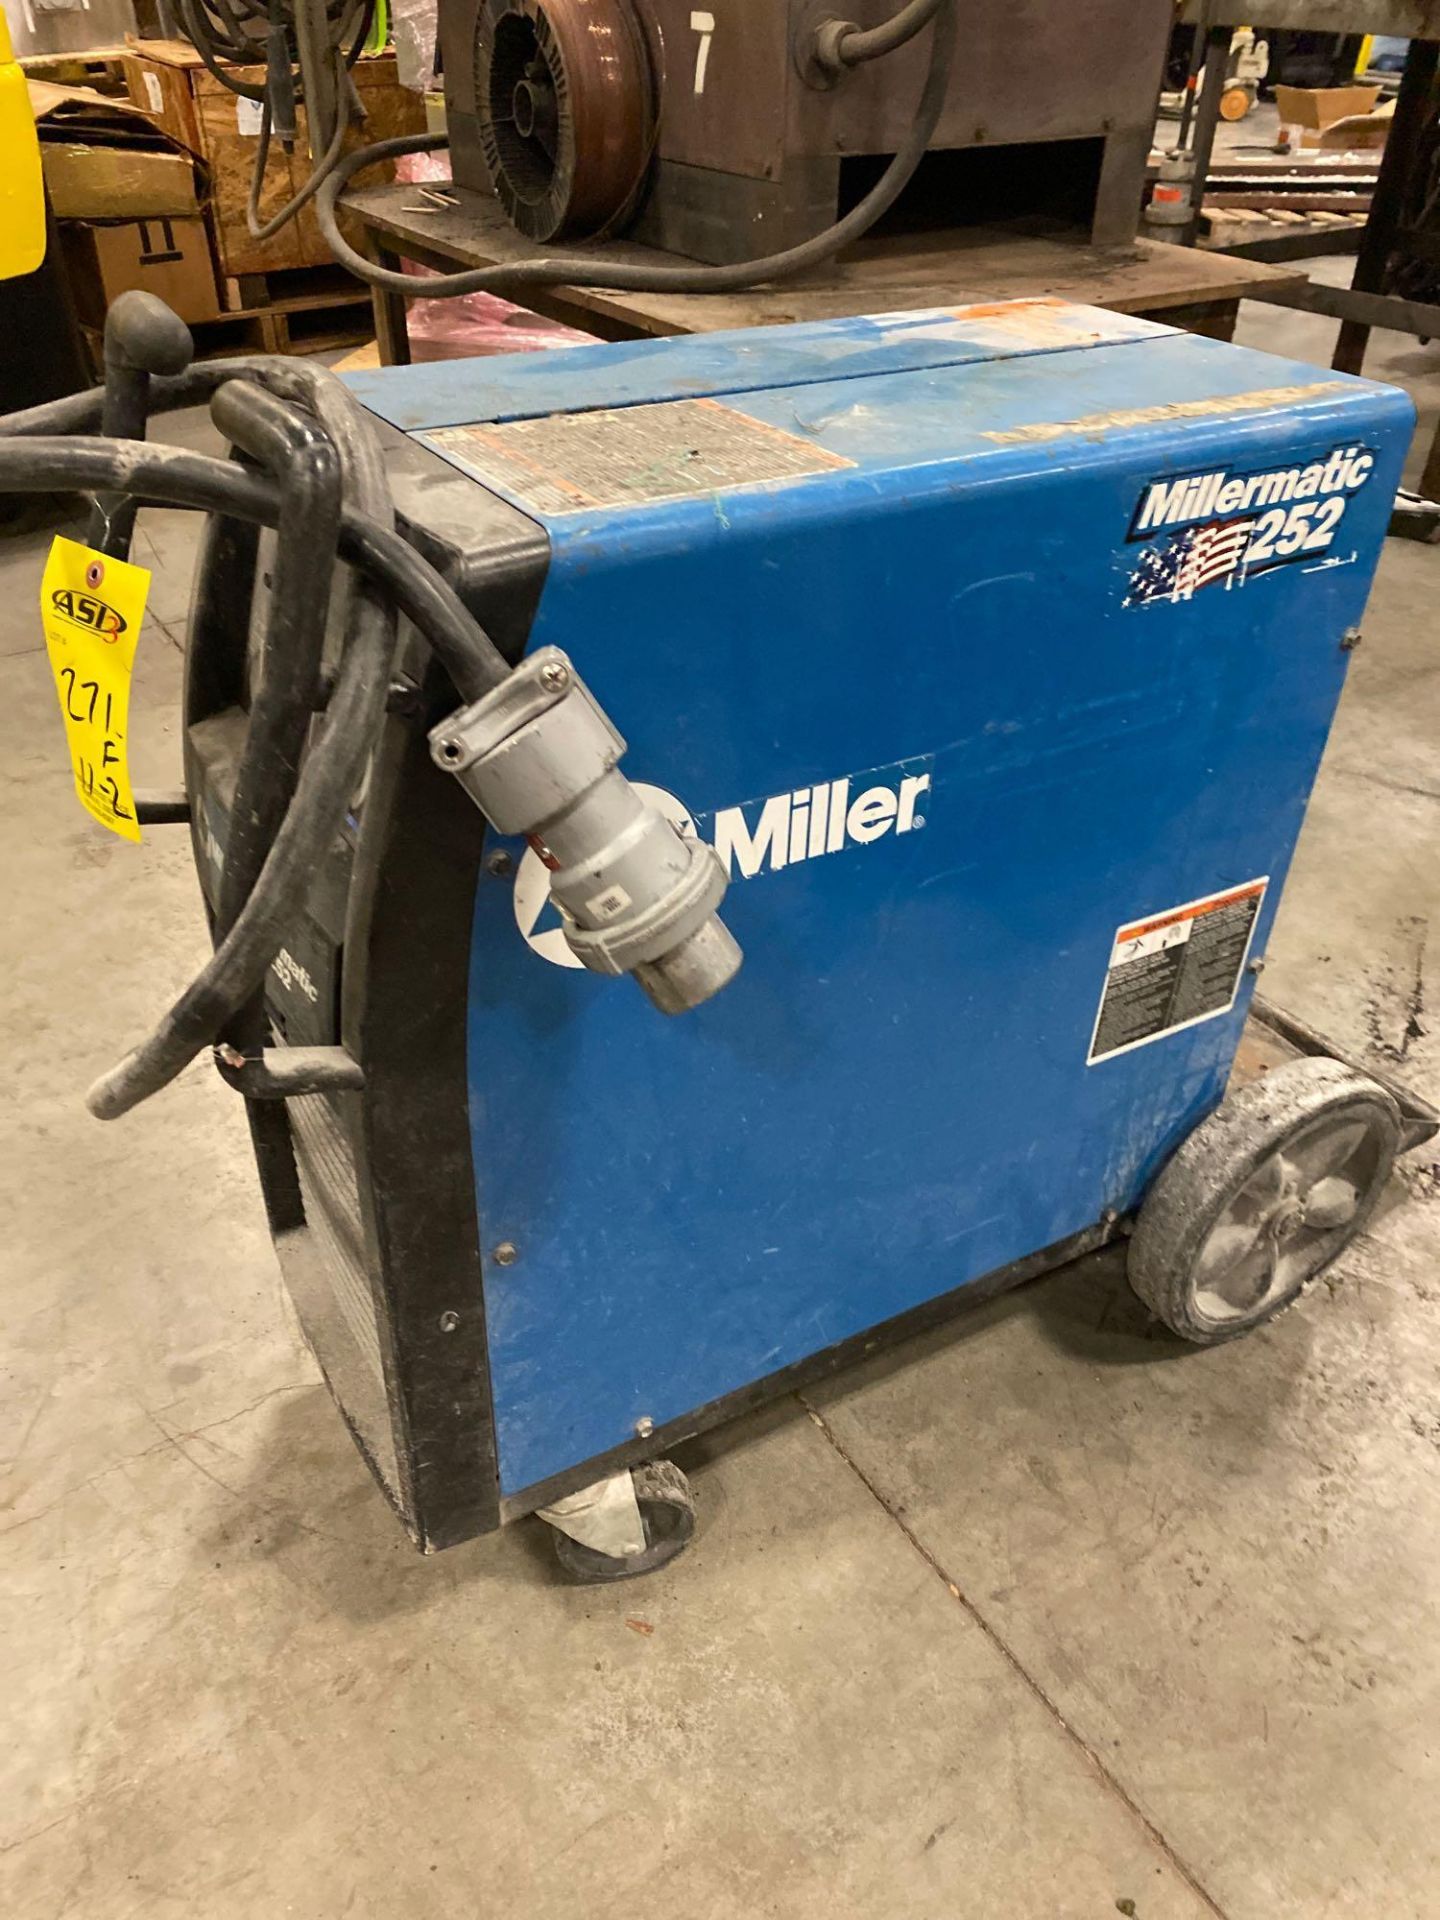 MILLERMATIC 252 WELDER, BUILT IN WIRE FEEDER, RUNS AND OPERATES - Image 5 of 6